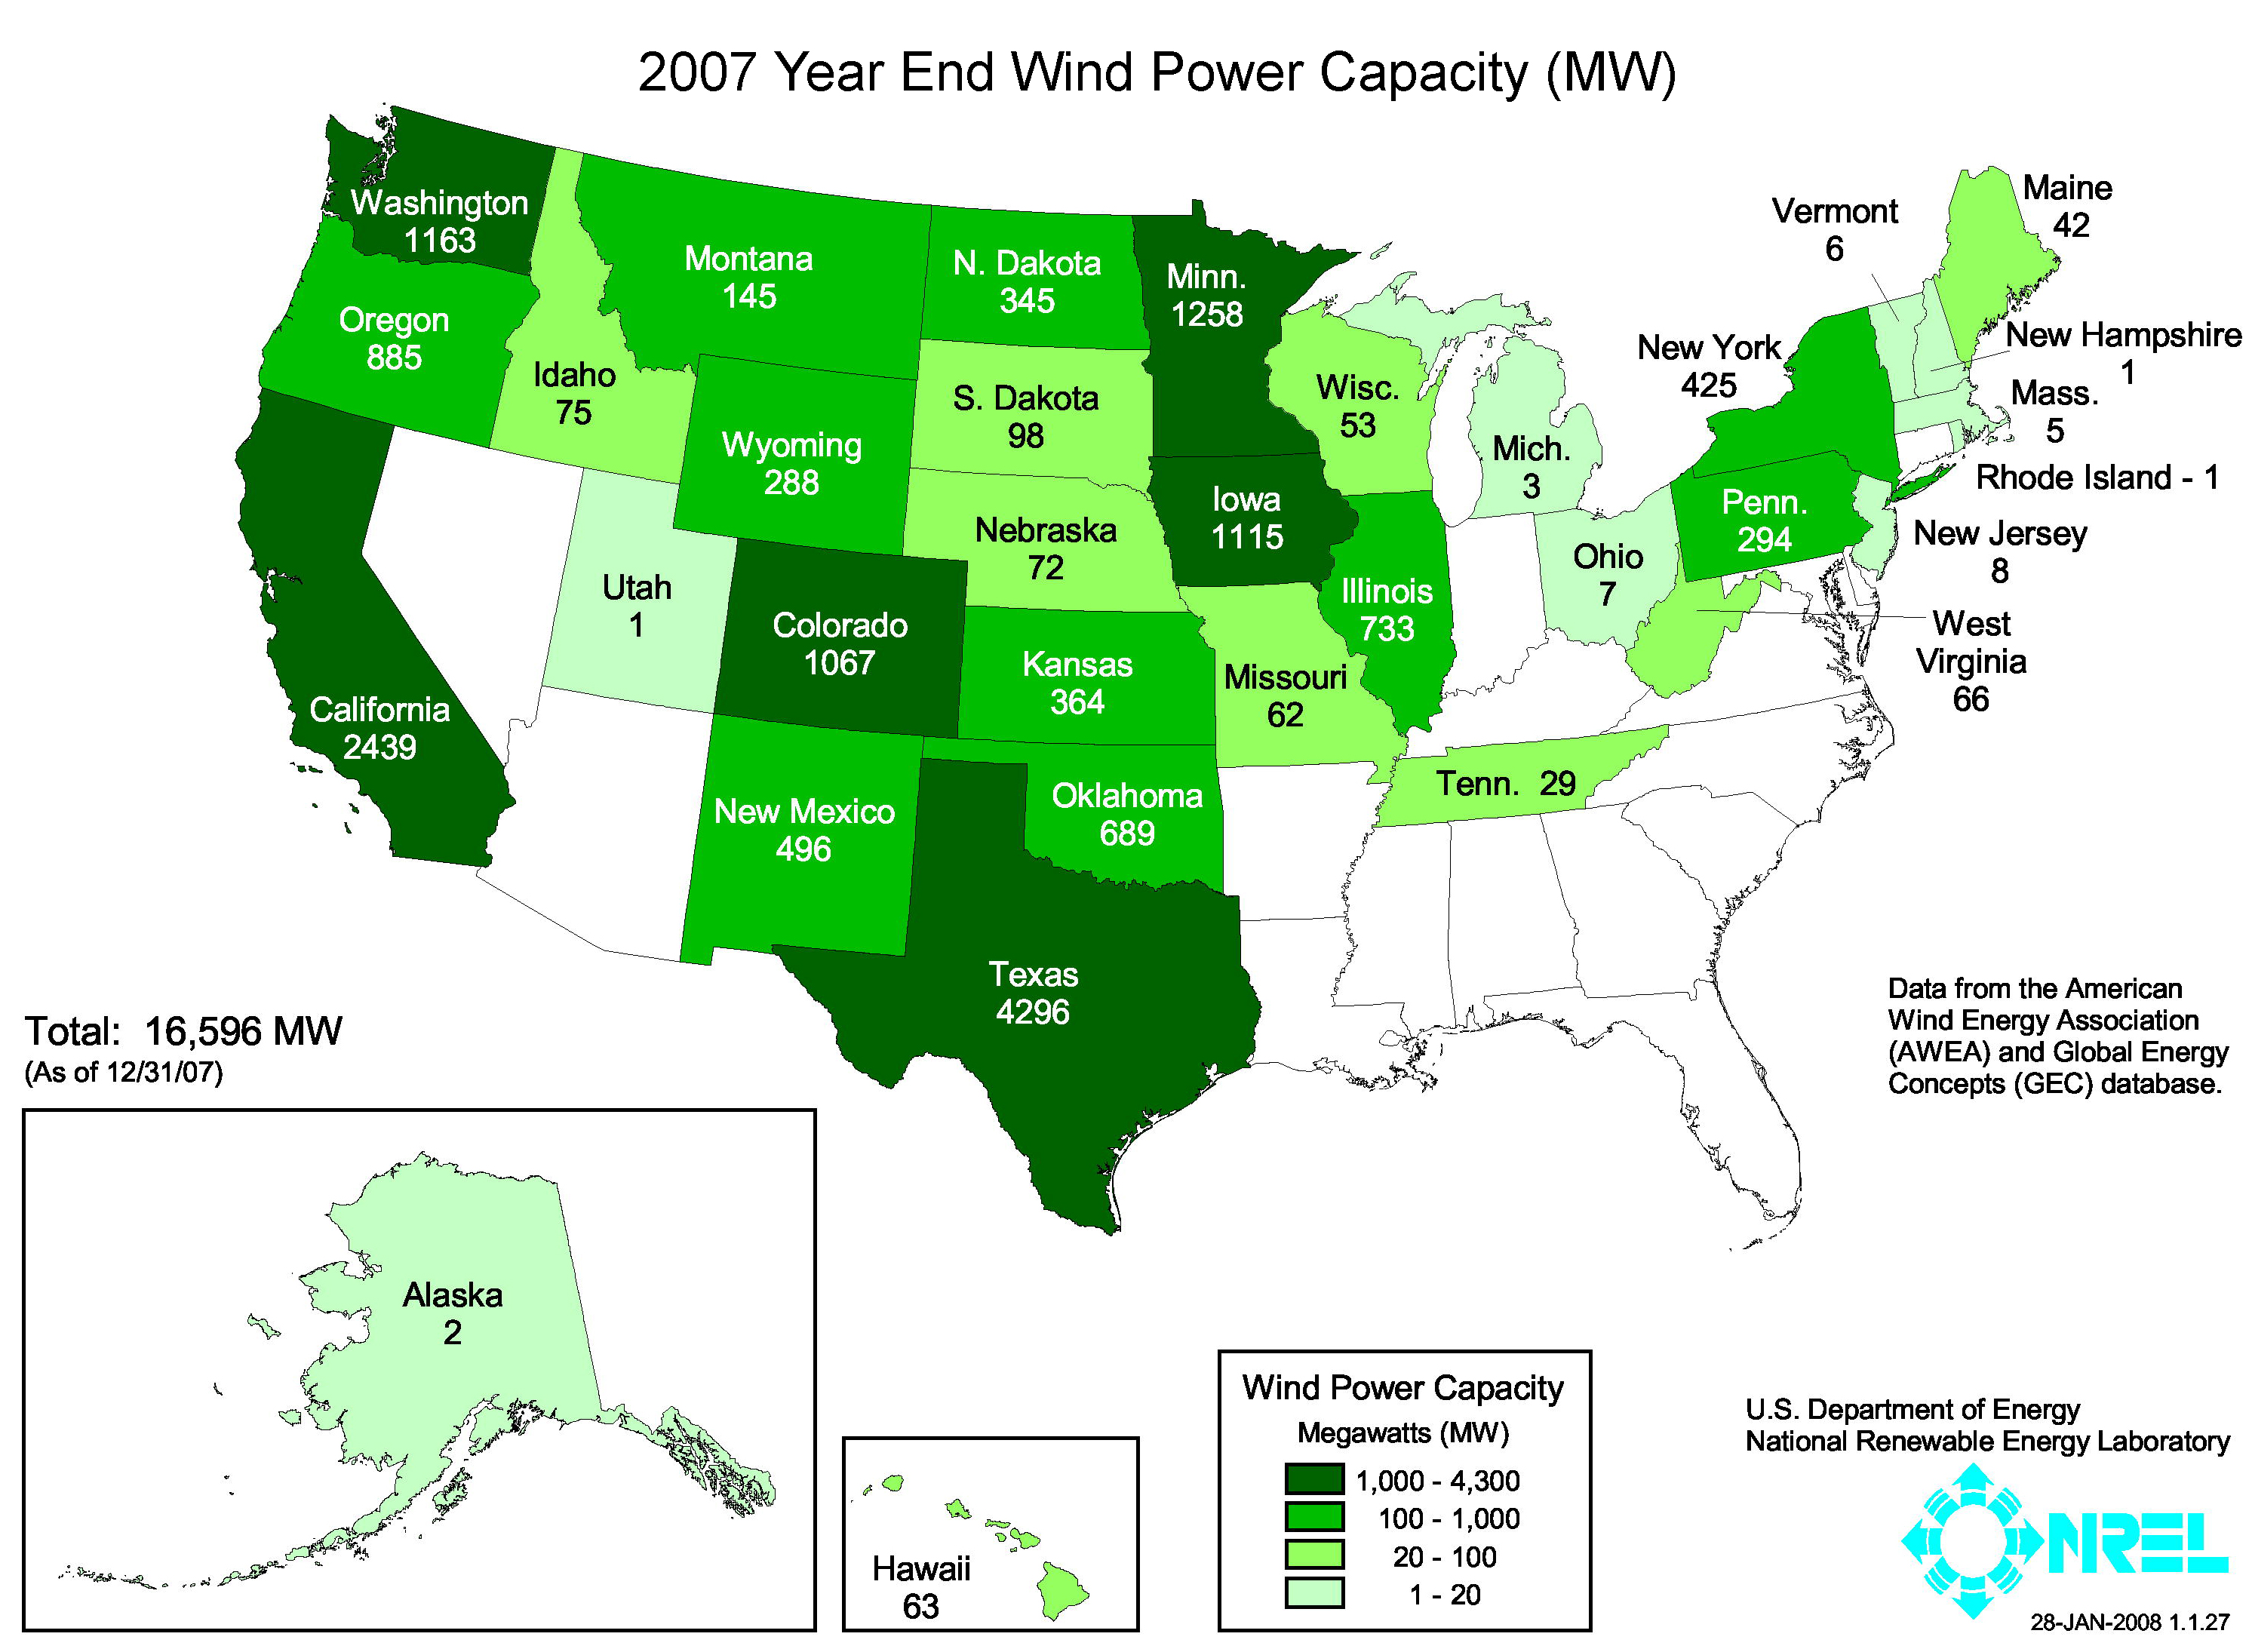 Renewable Energy Can Provide 80 Percent of U.S. Electricity by 2050